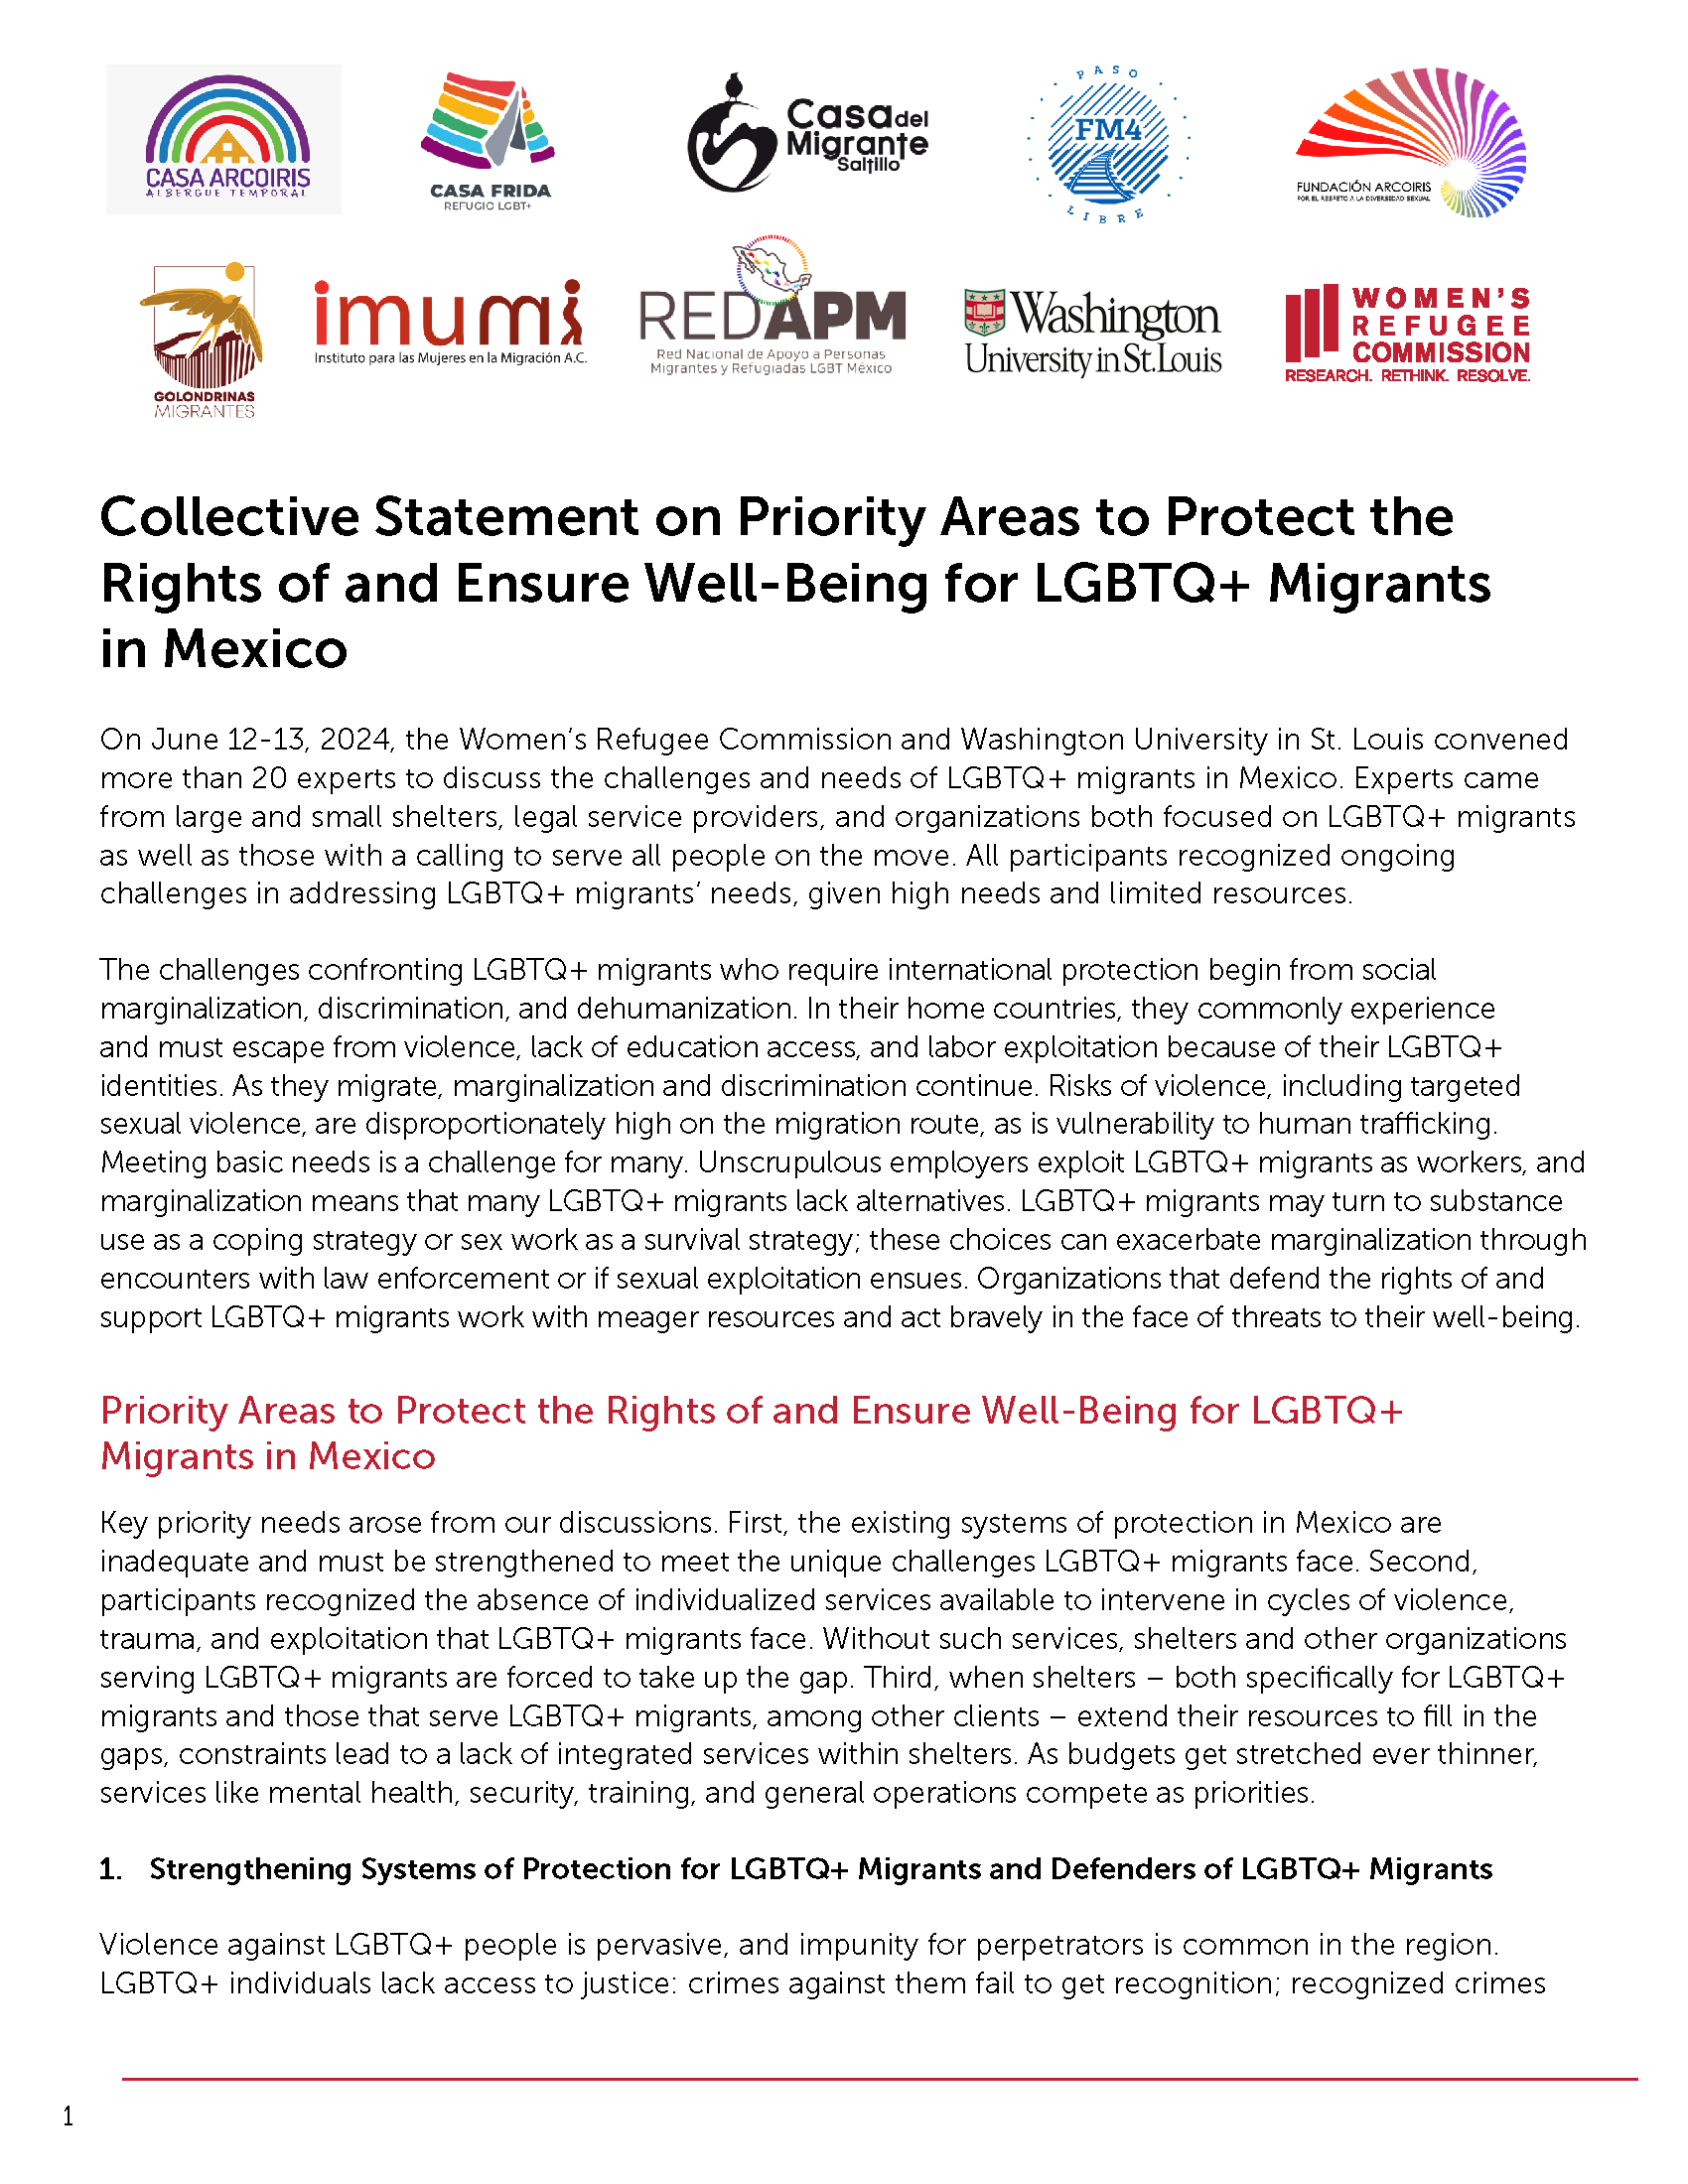 Collective Statement on Priority Areas to Protect the Rights of and Ensure Well-Being for LGBTQ+ Migrants in Mexico